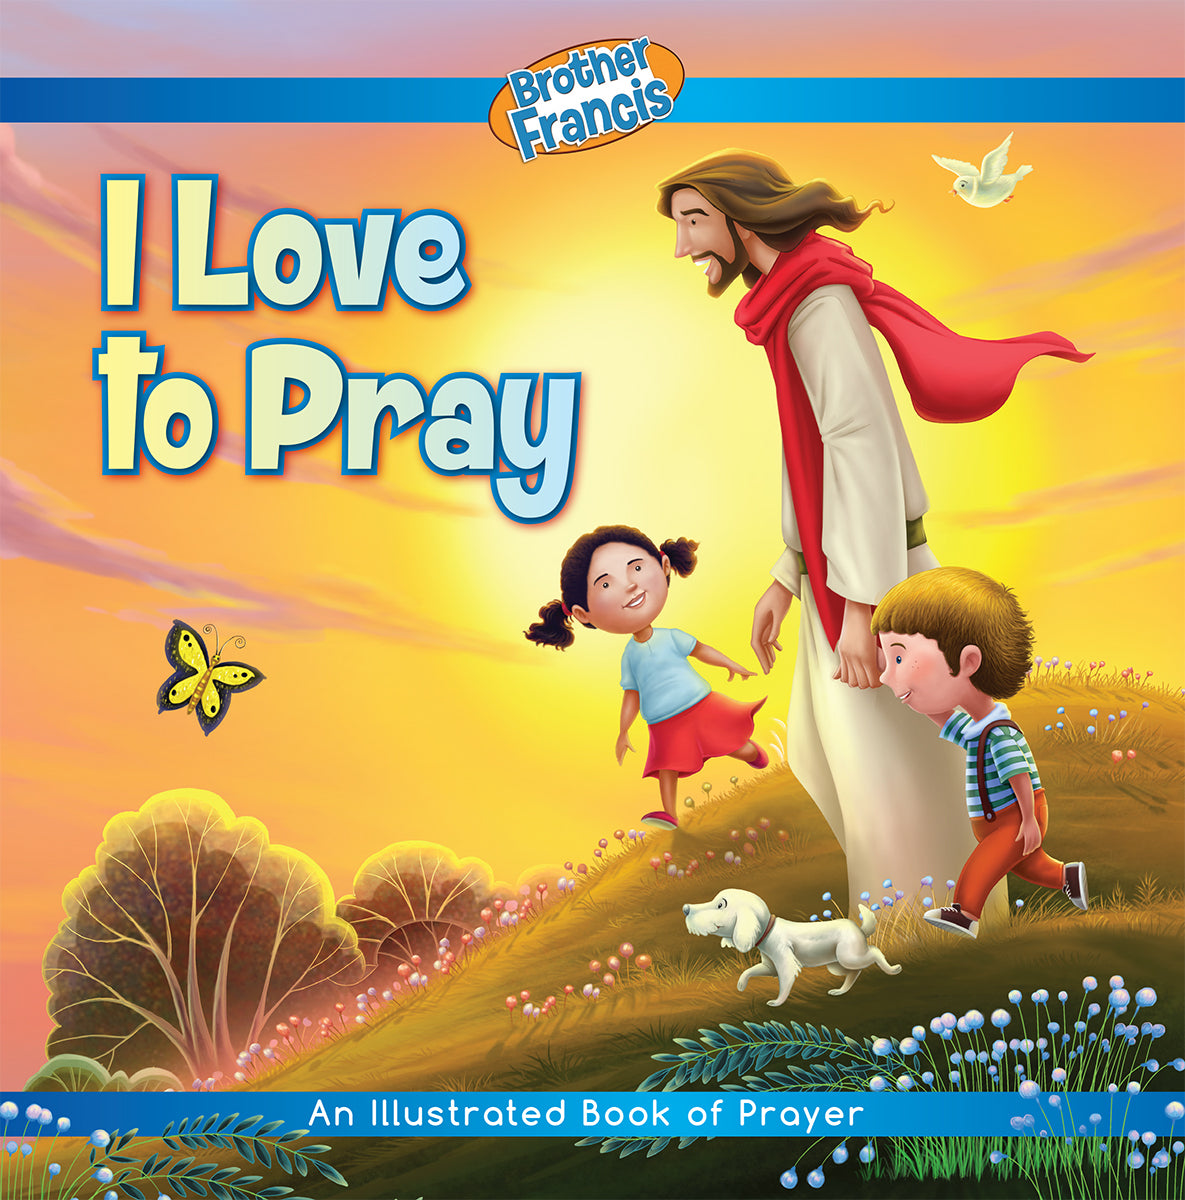 I Love To Pray: An Illustrated Book of Prayer